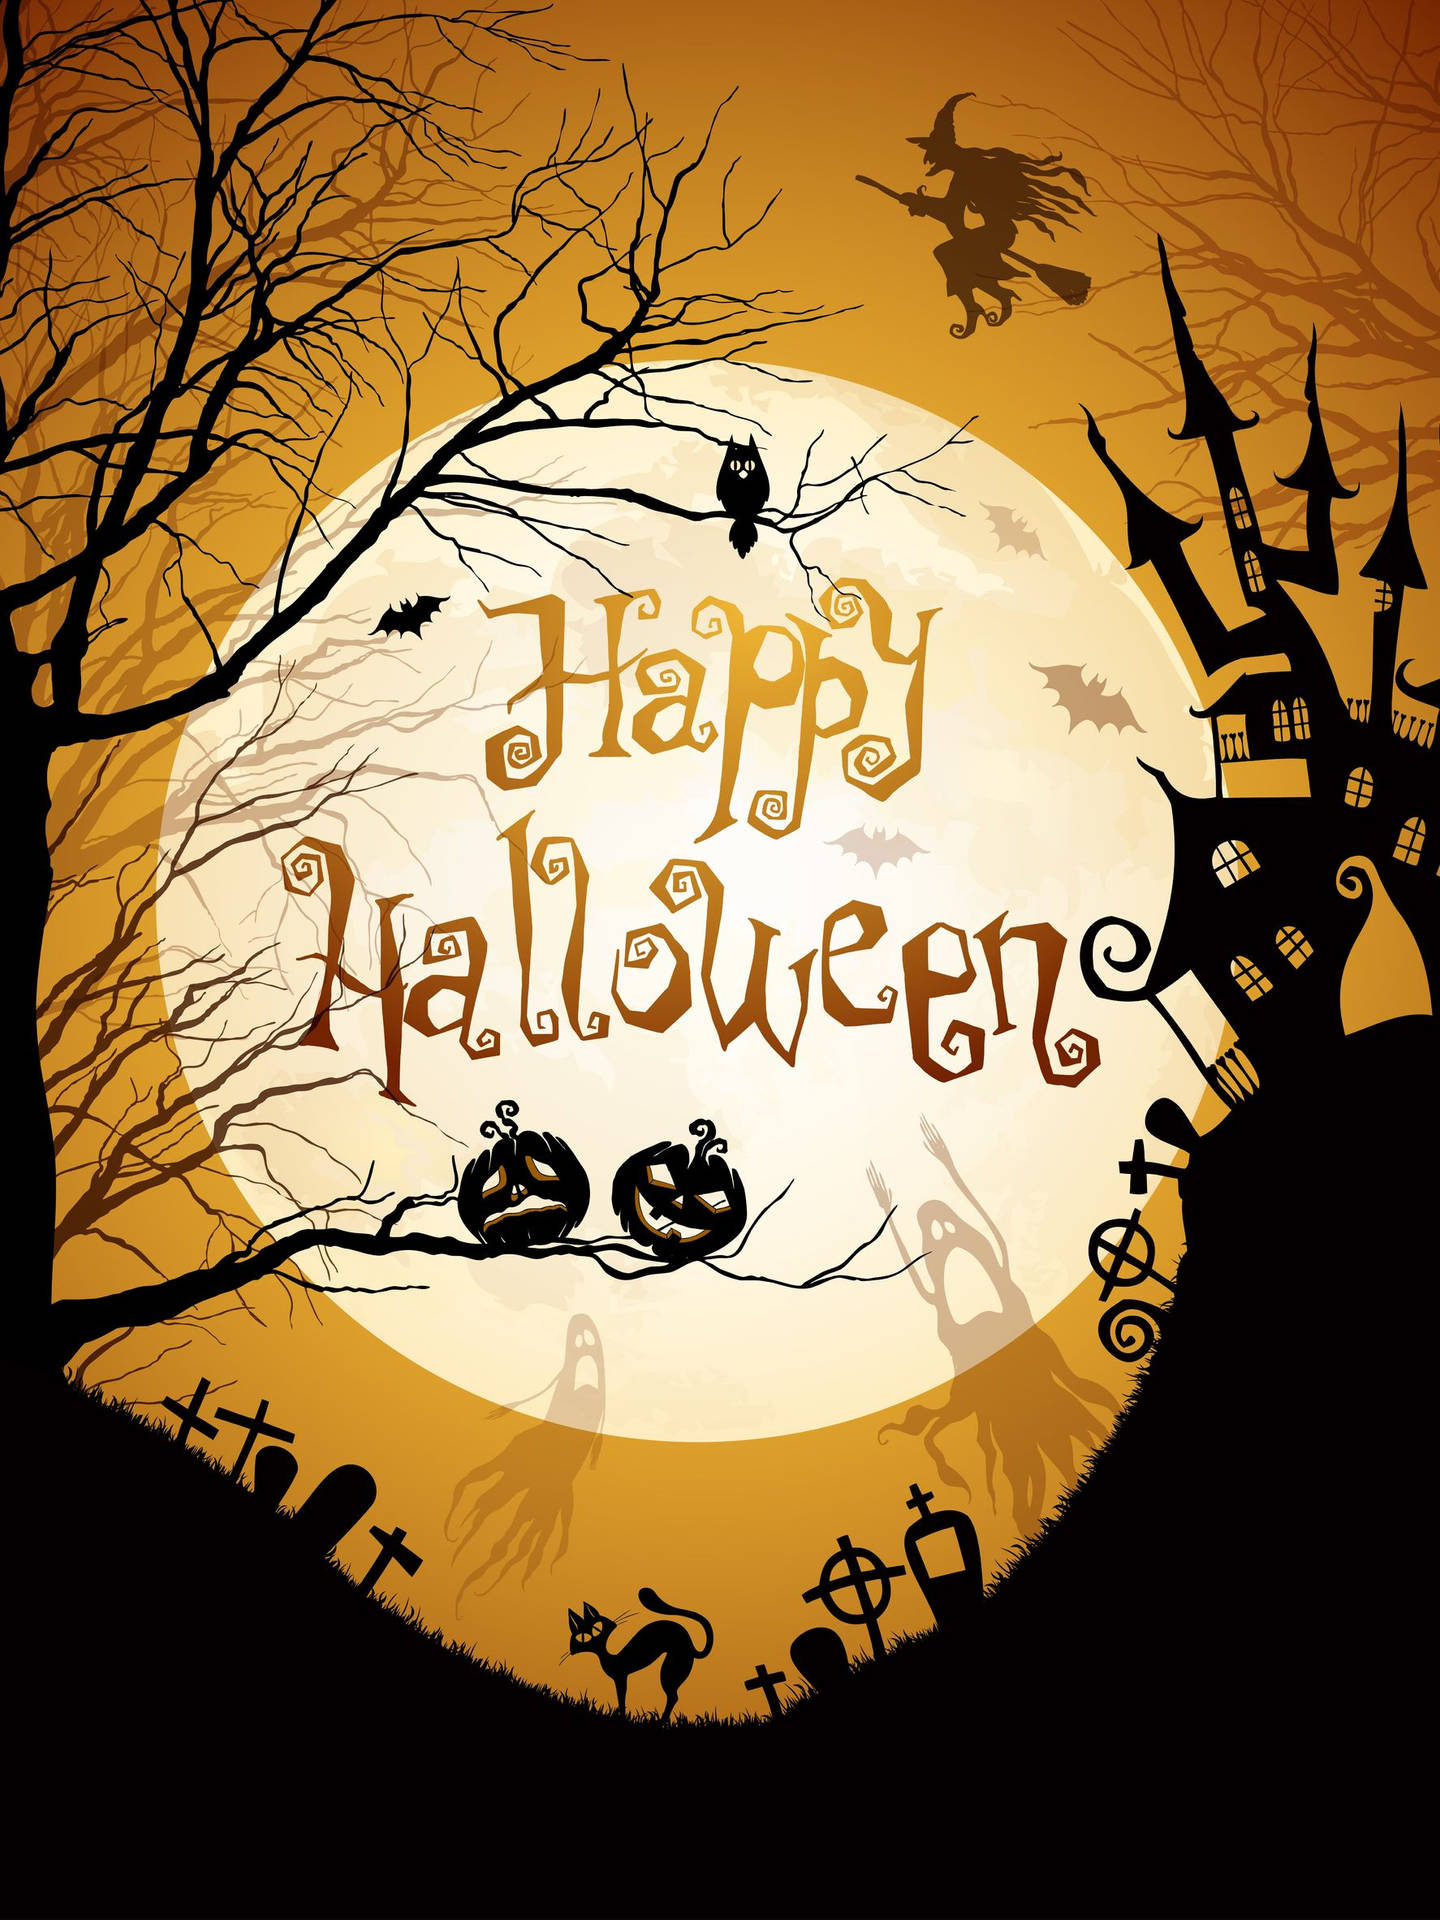 Celebrate a happy, fun and spooky Halloween this year! Wallpaper